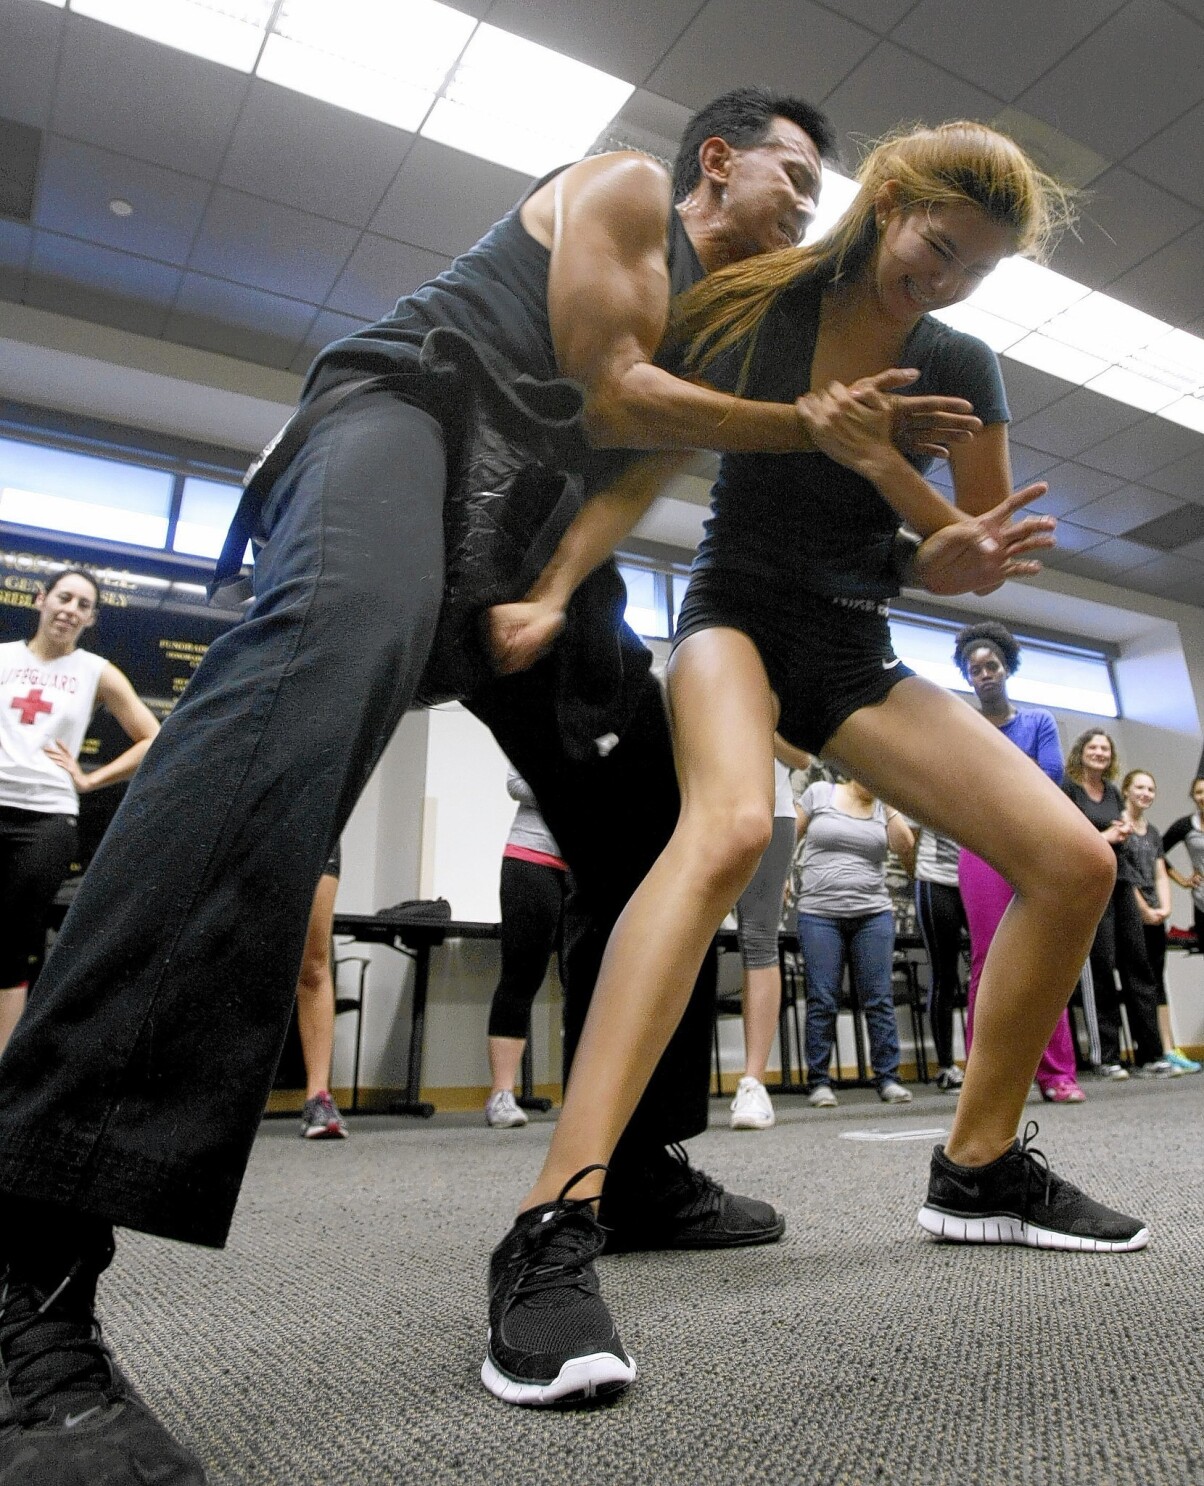 Self Defense Classes Resume For Women And Men In Glendale Los Angeles Times